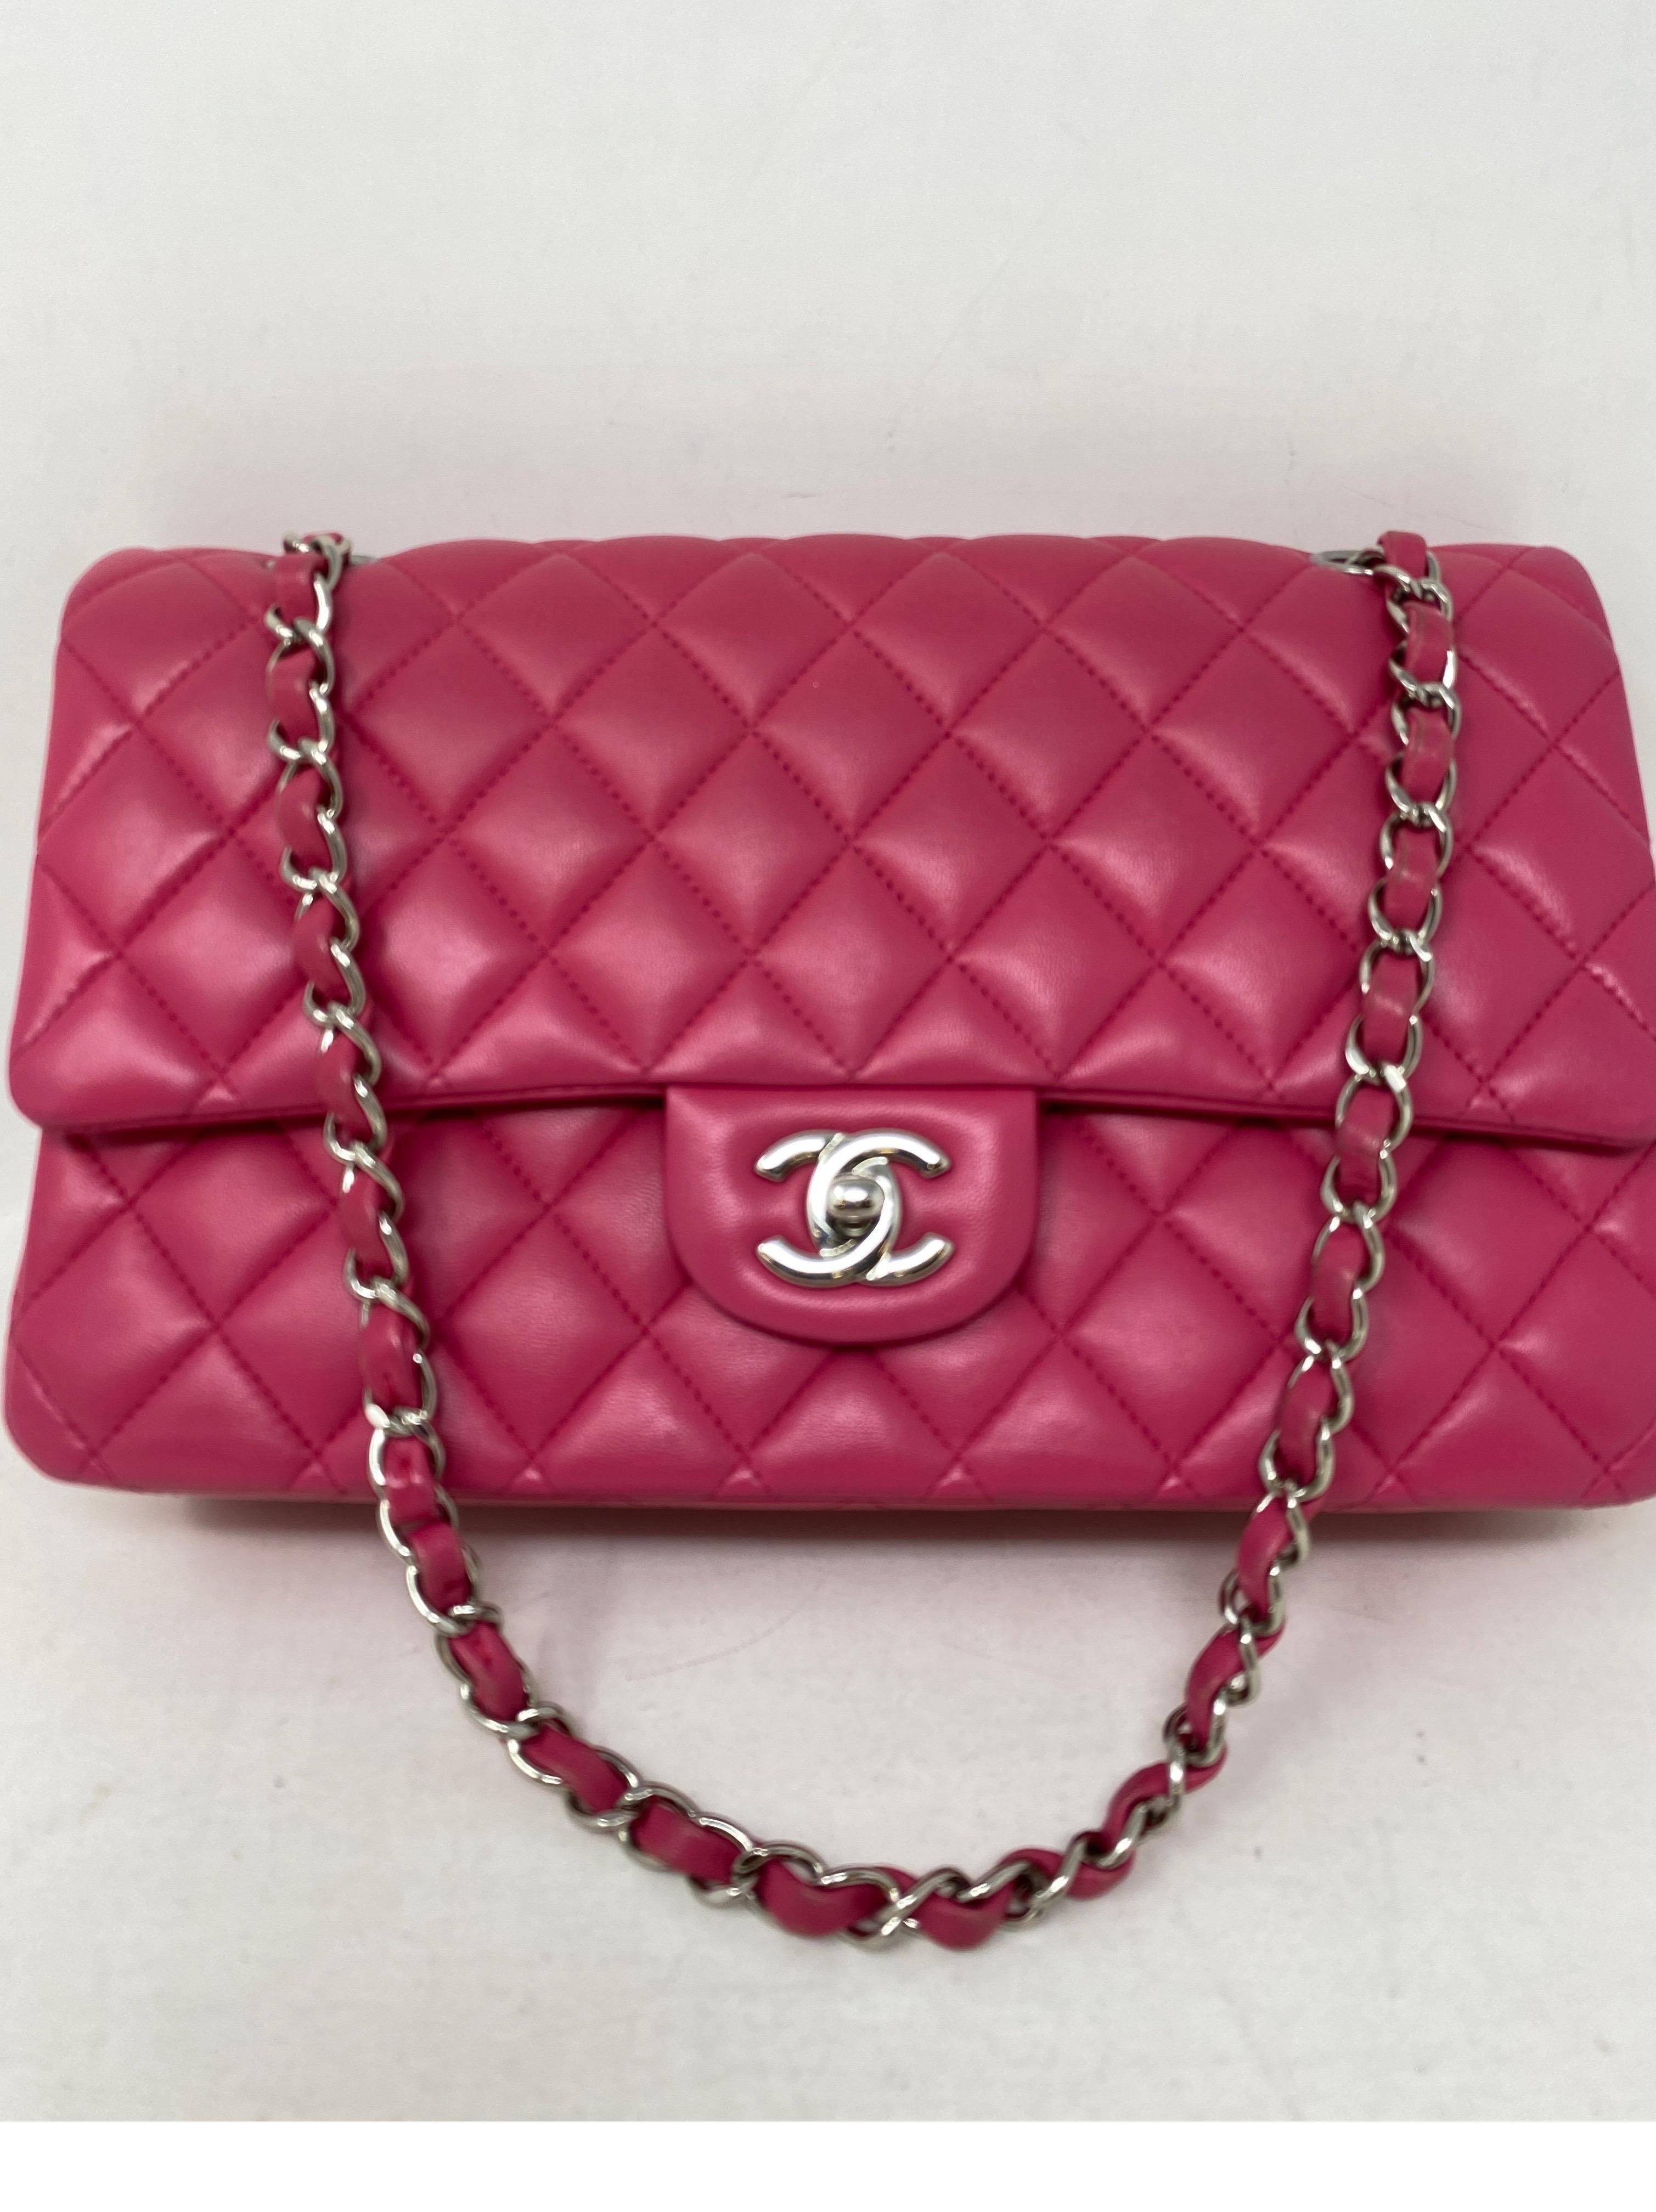 Chanel Hot Pink Medium Double Flap Bag. Lambskin hot pink color. Beautiful leather bag in good condition. Rare sought after hot color. Silver hardware. Includes dust cover and box. Guaranteed authentic. 